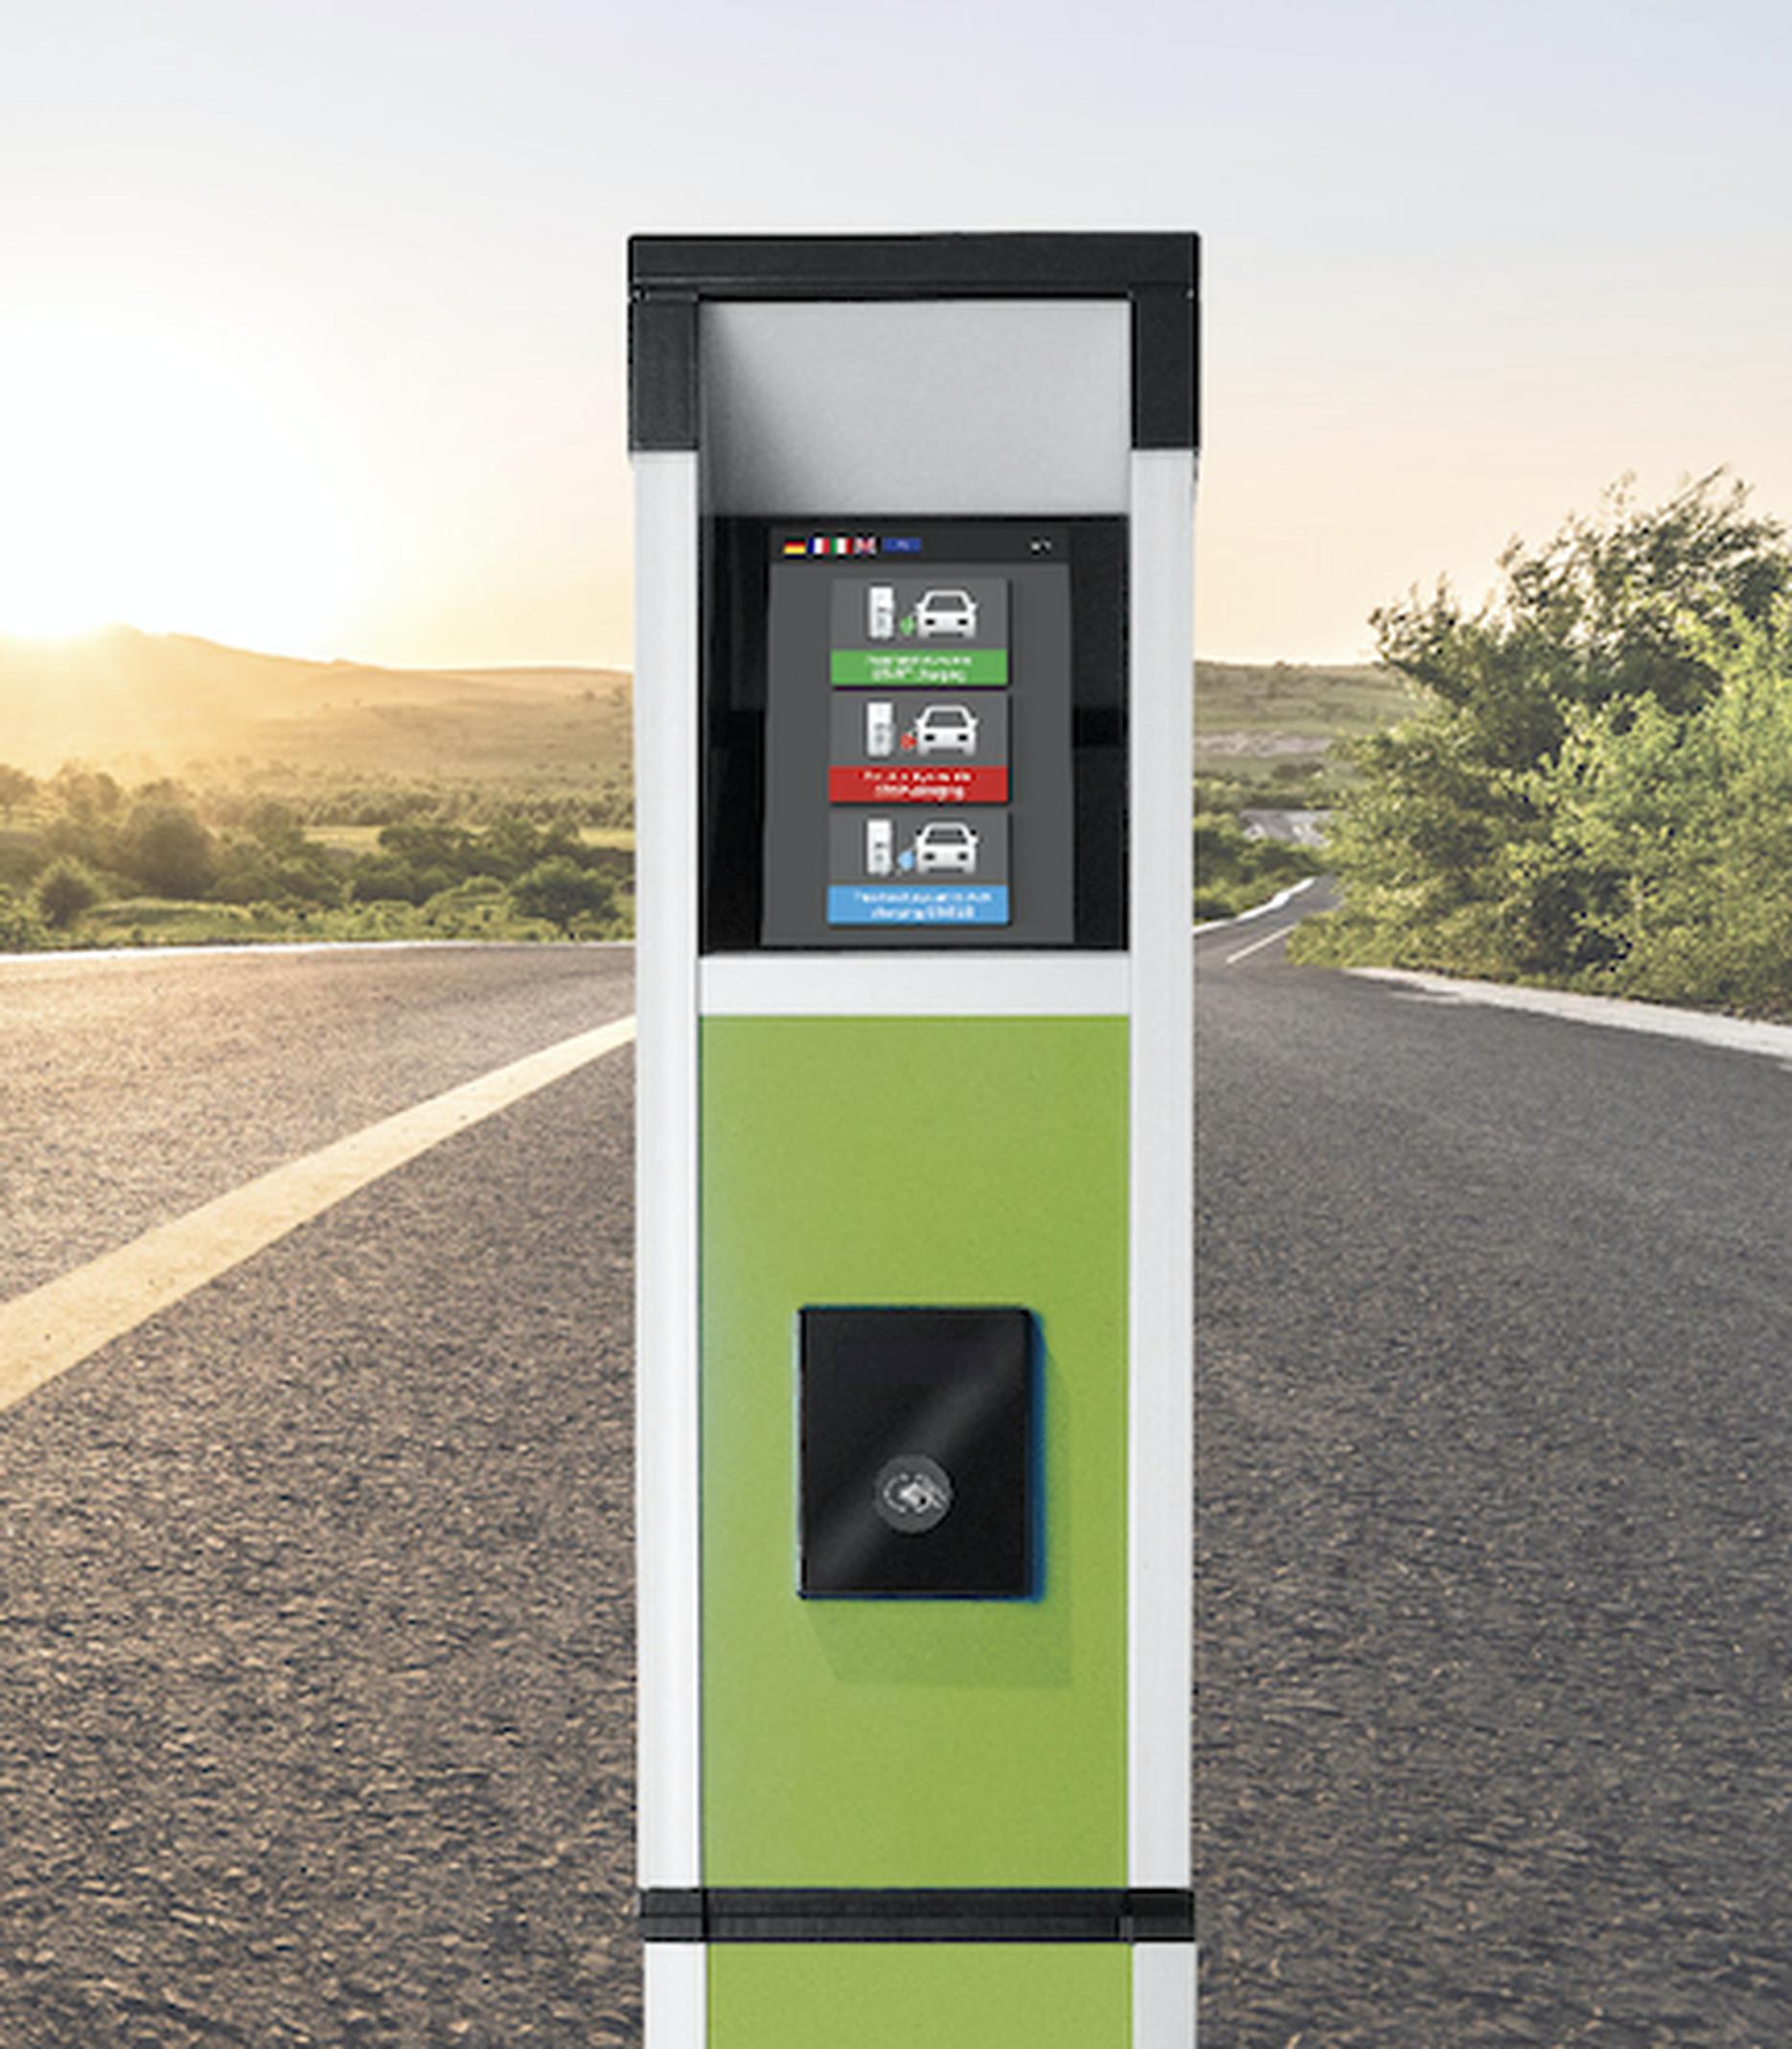 Hectronic launches e-mobility unit